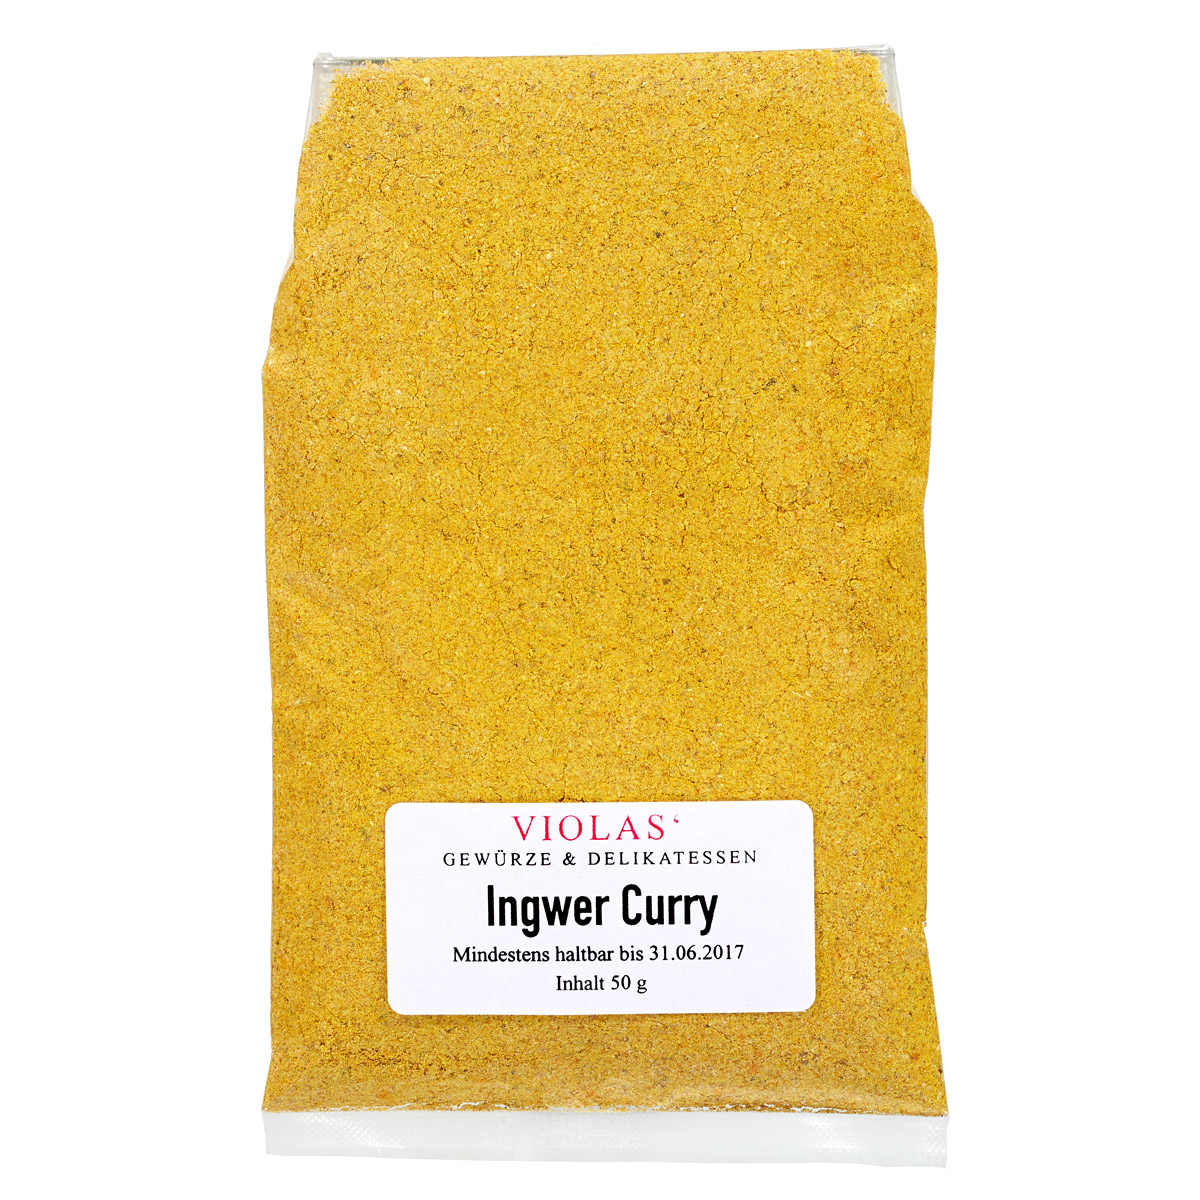 Ingwer Curry